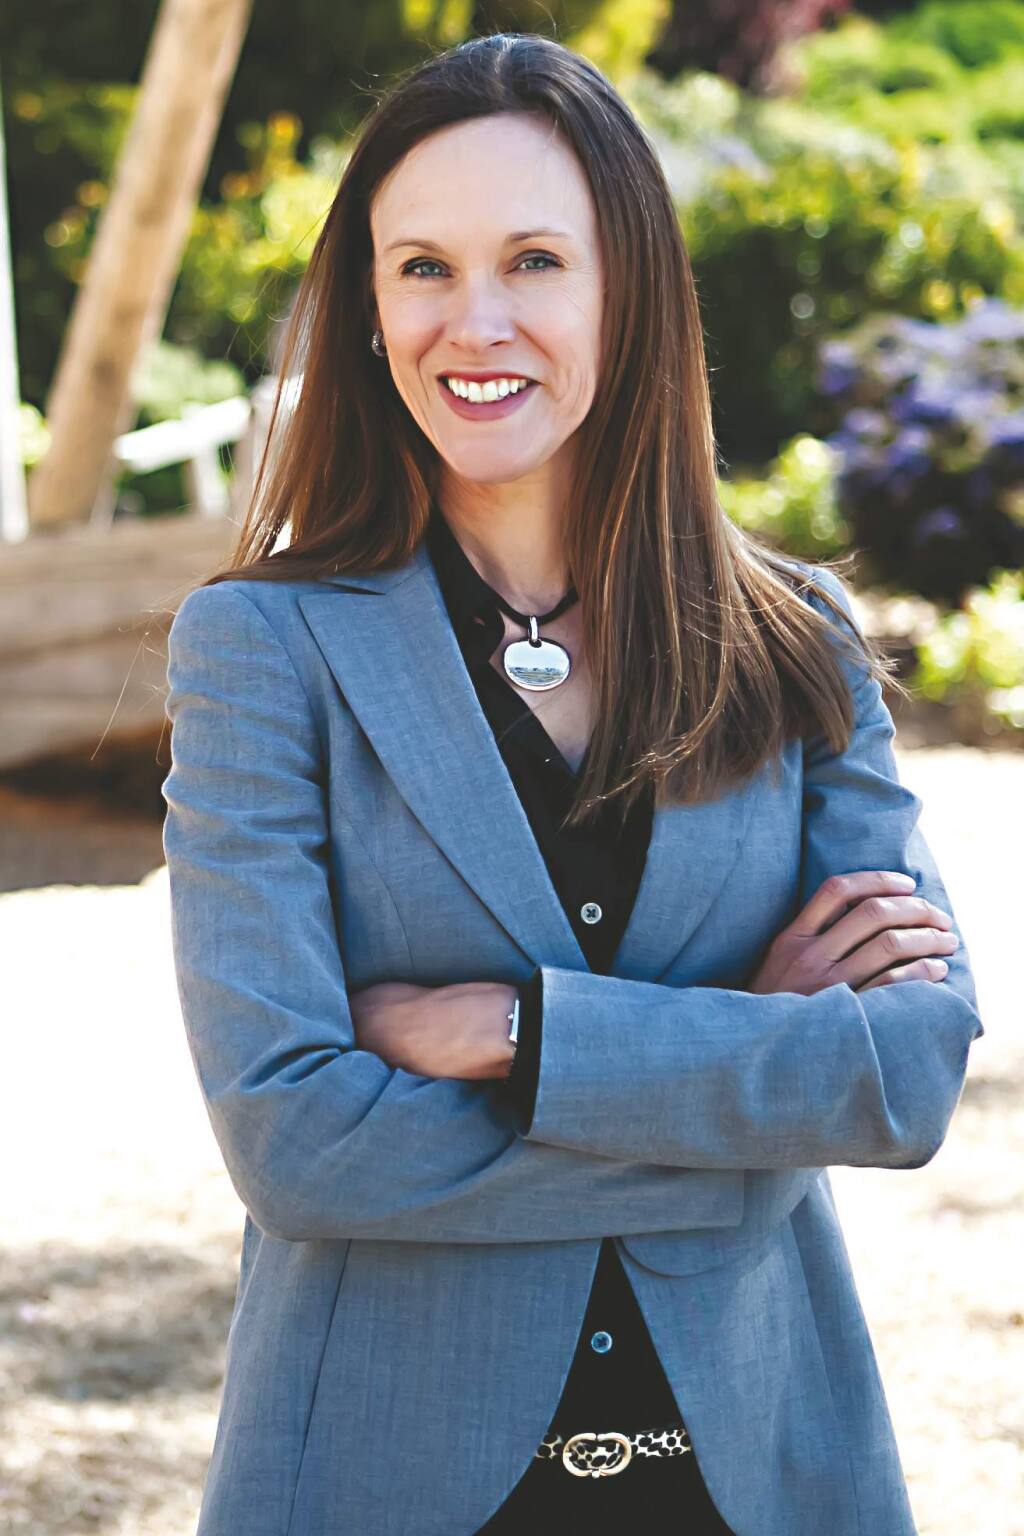 Karyn Flynn, CEO of Bay Area Discovery Museum, is keynote speaker for the Business Journal's 15th annual Women in Business awards gala June 24, 2015.